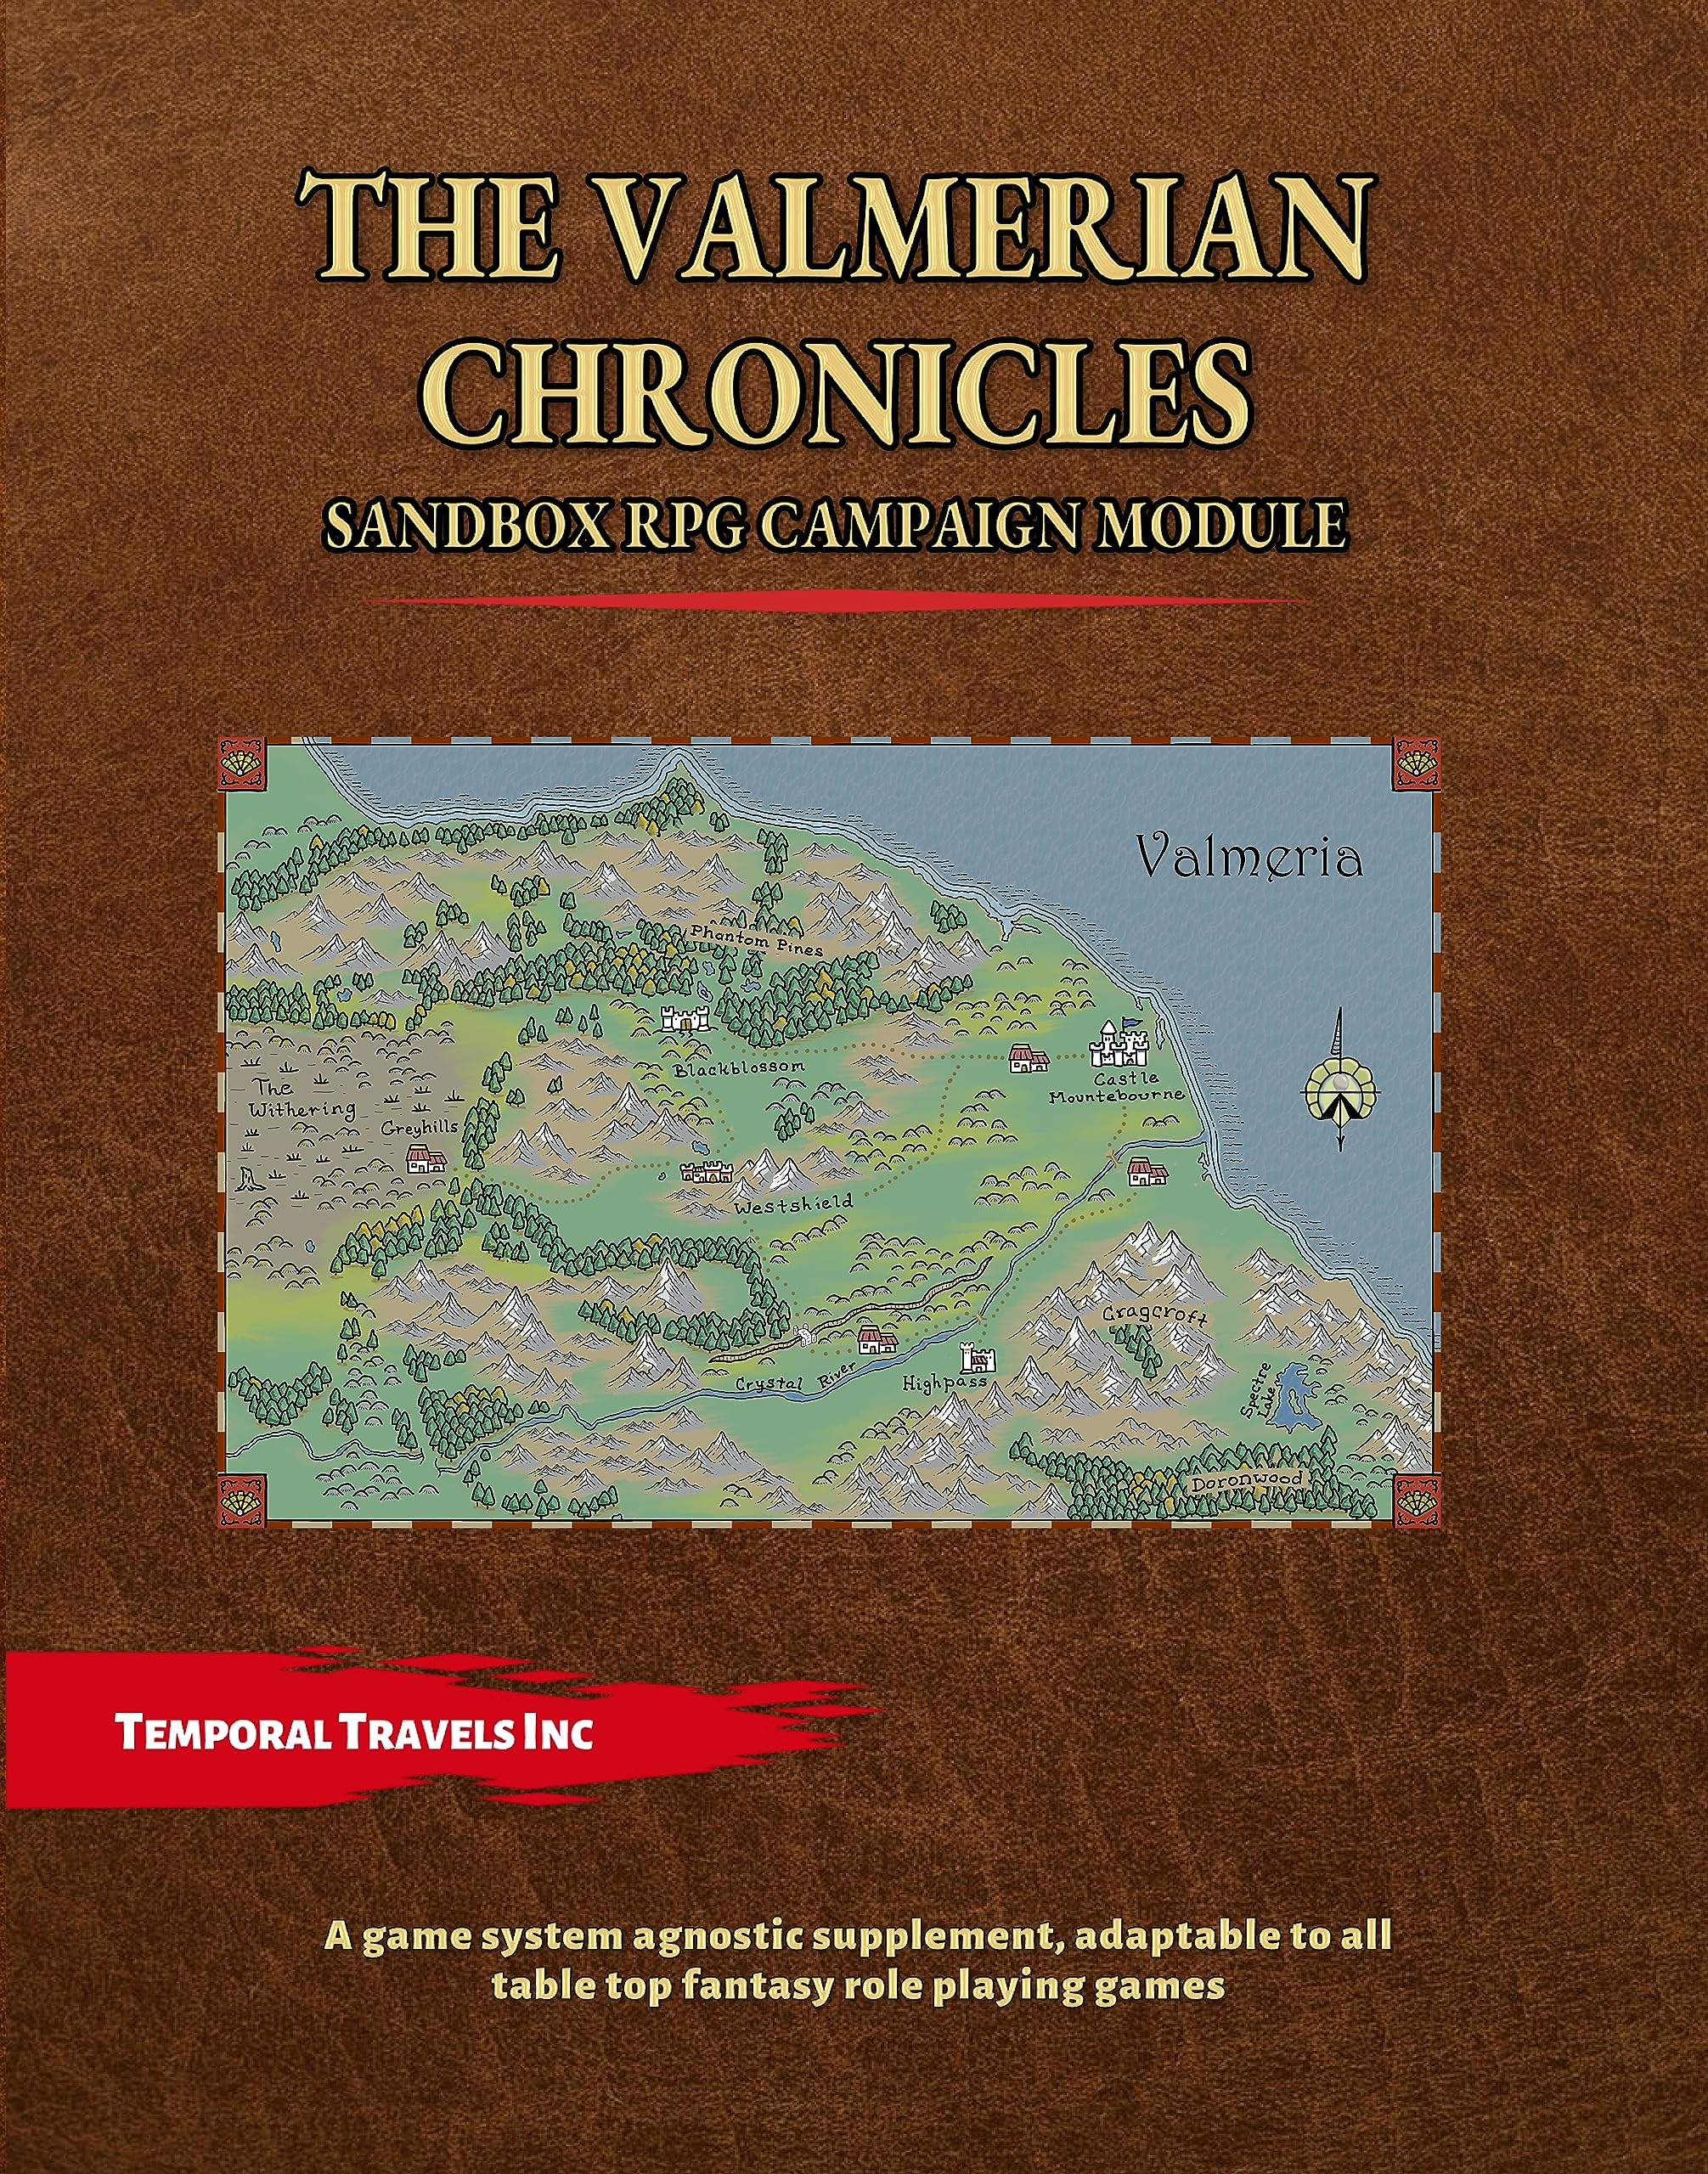 The Valmerian Chronicles: A fantasy RPG sandbox campaign meant for all game systems